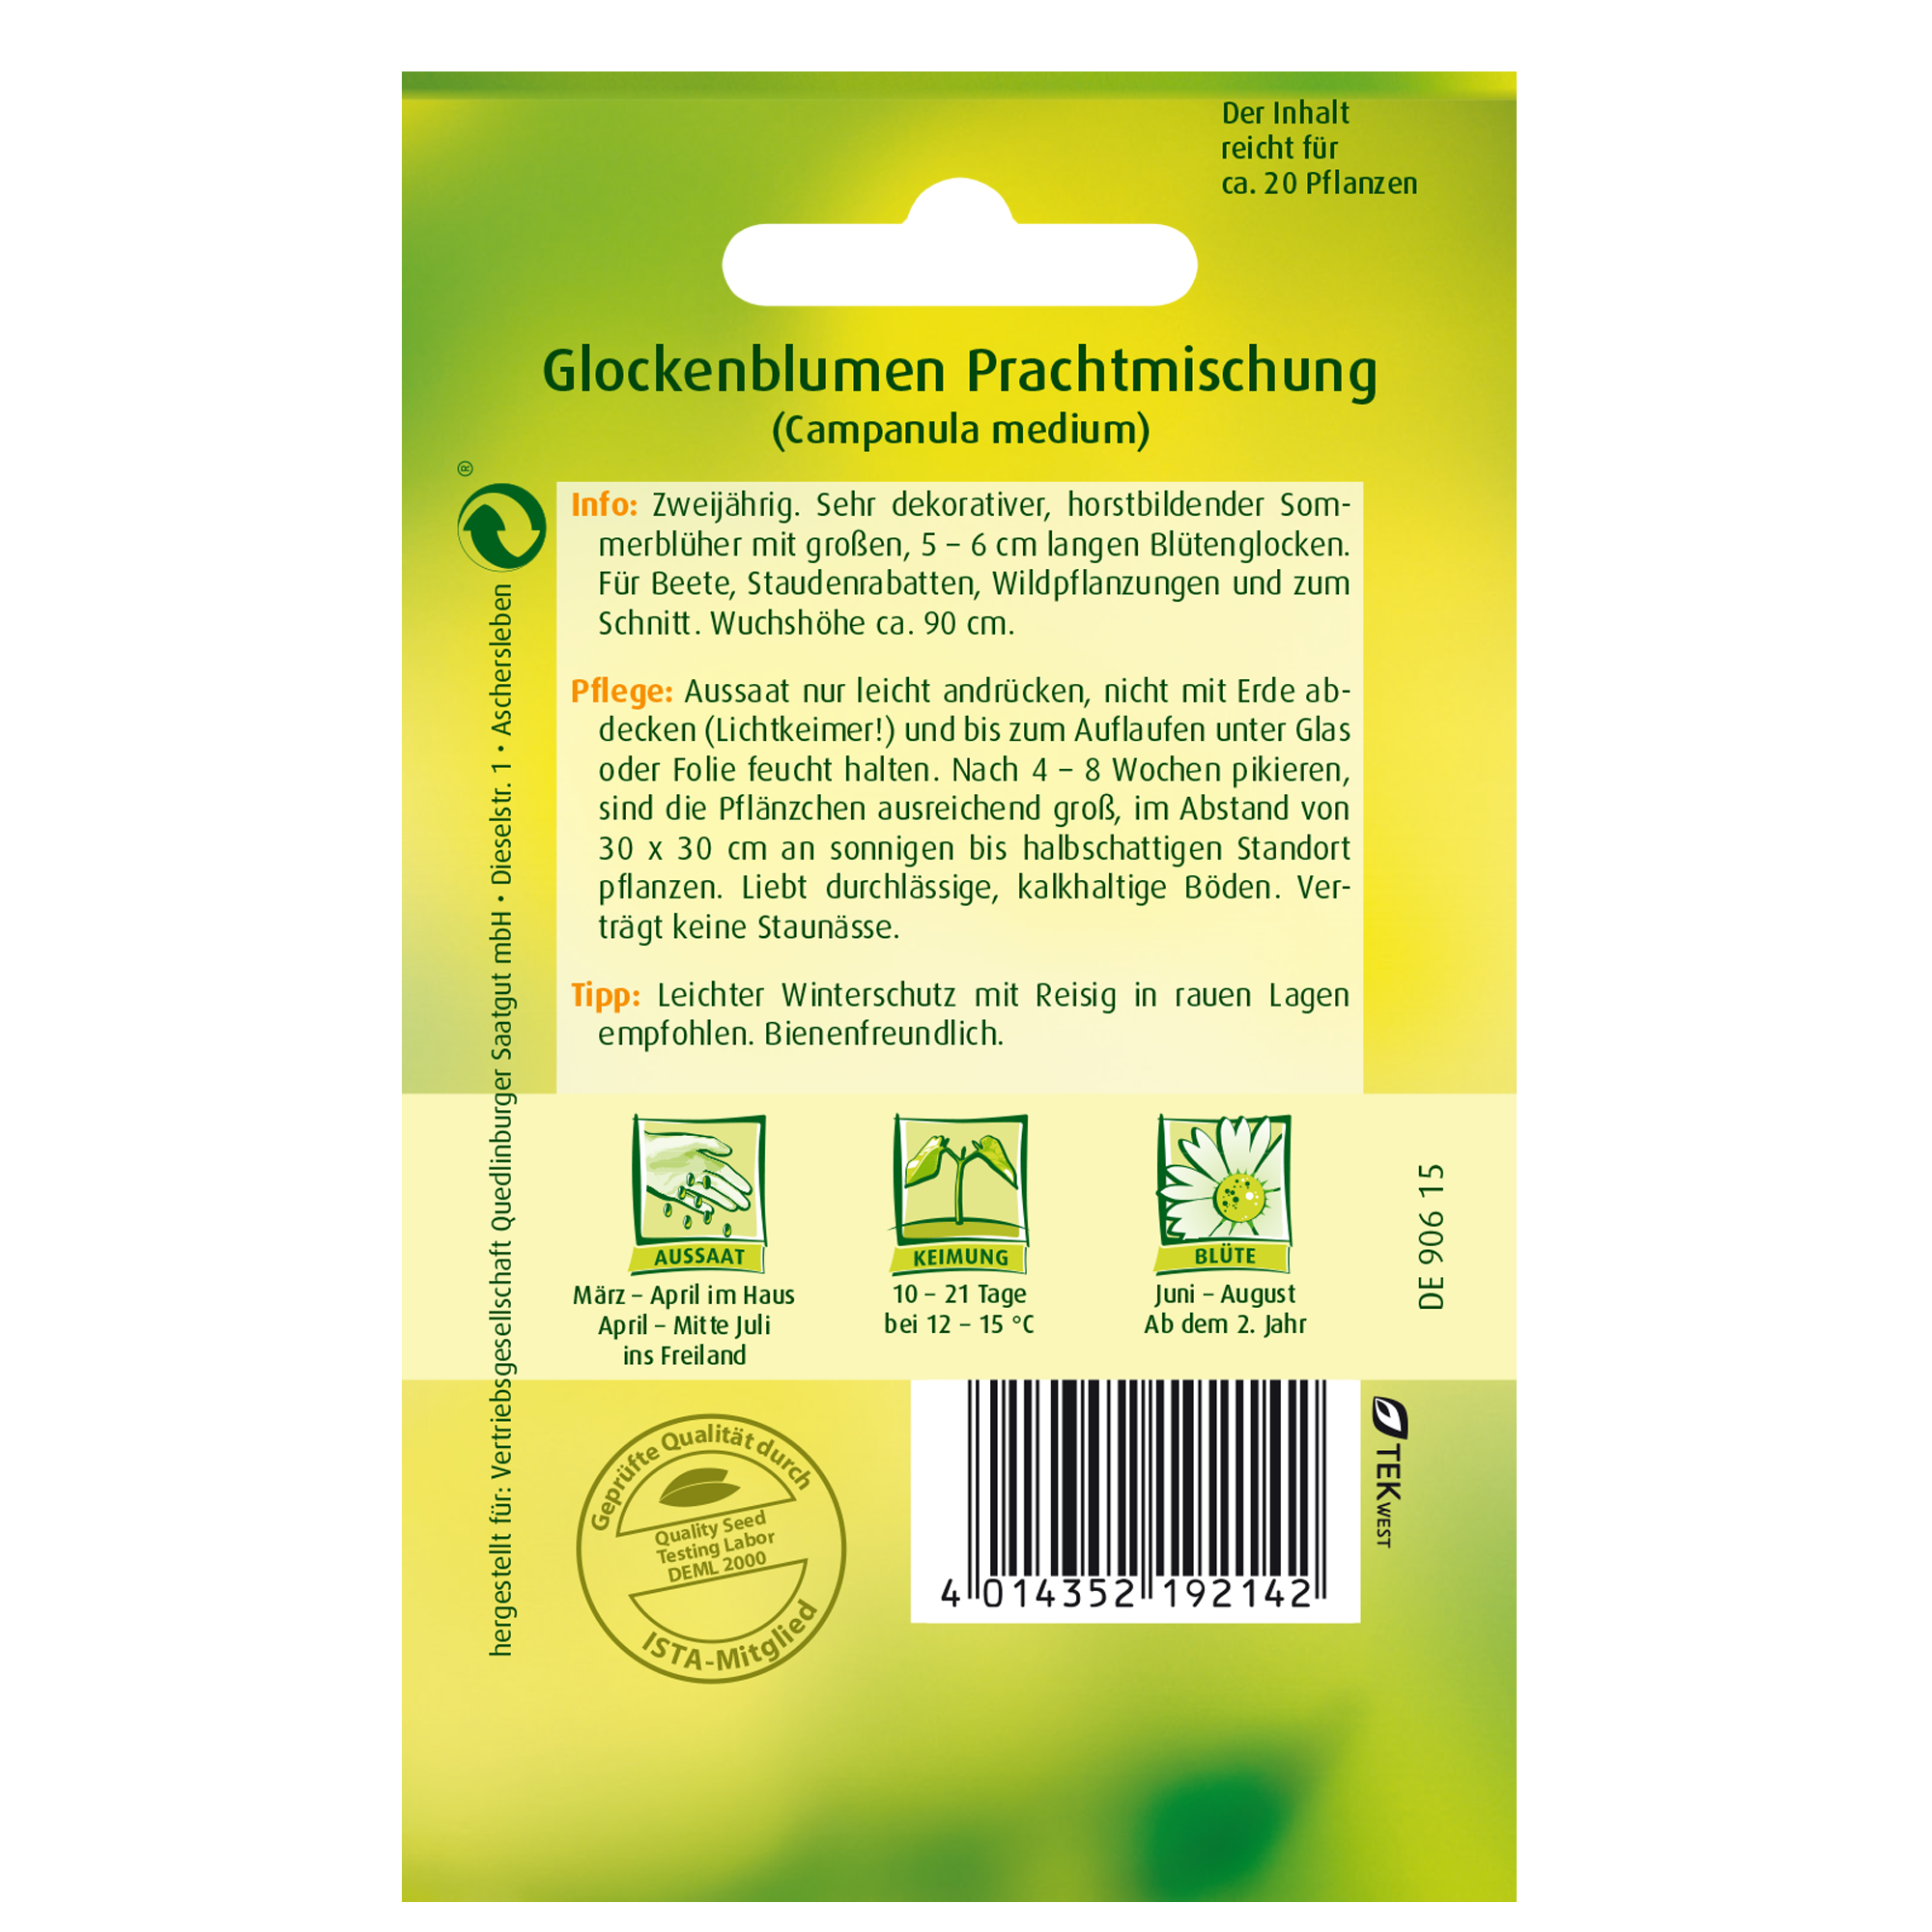 Glockenblume 'Prachtmischung' + product picture